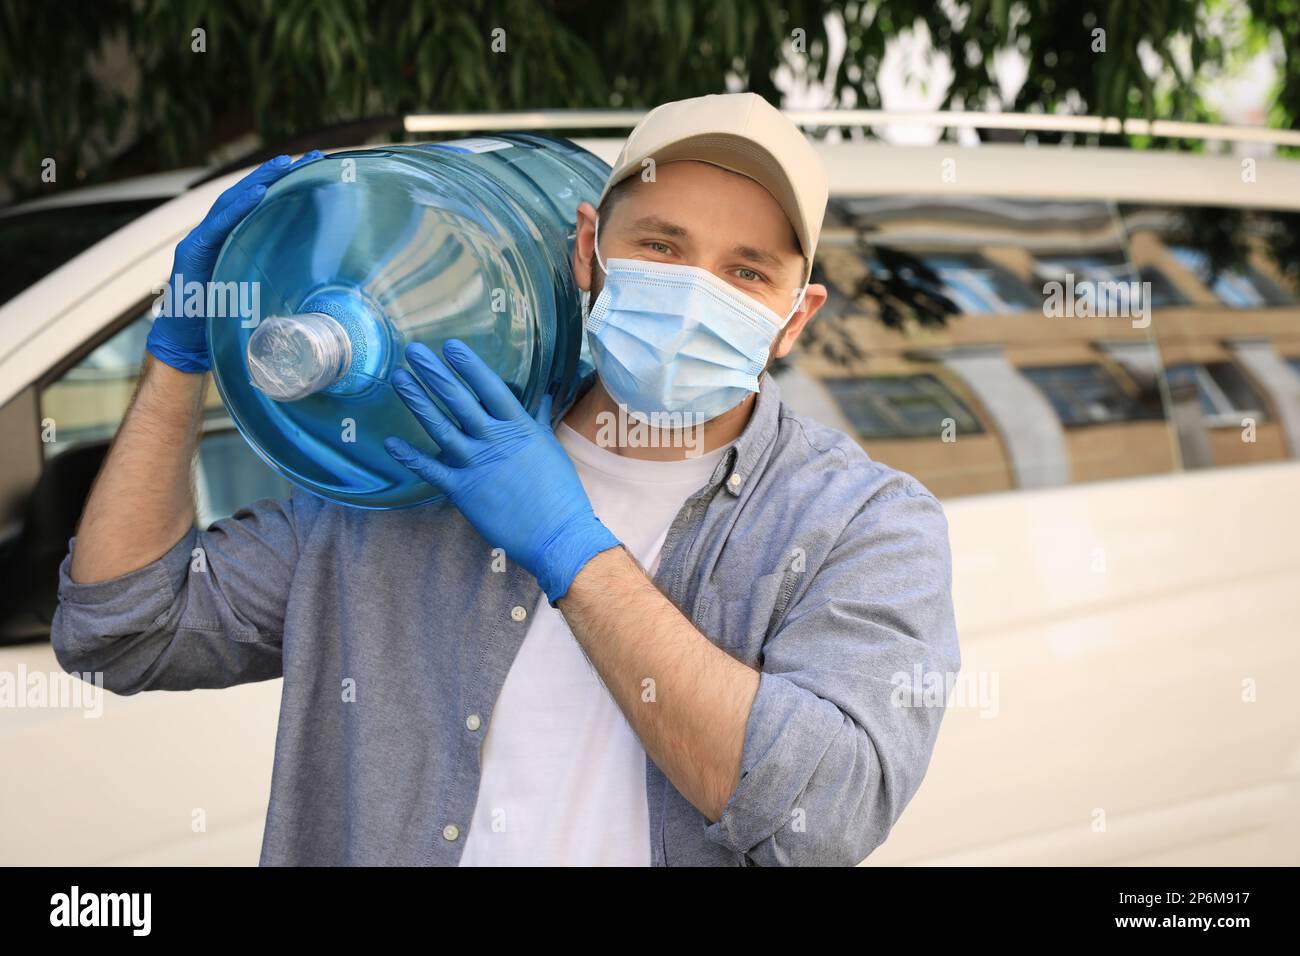 Man with a Giant Water Bottle Stock Photo - Image of plastic, fantasy:  128843590